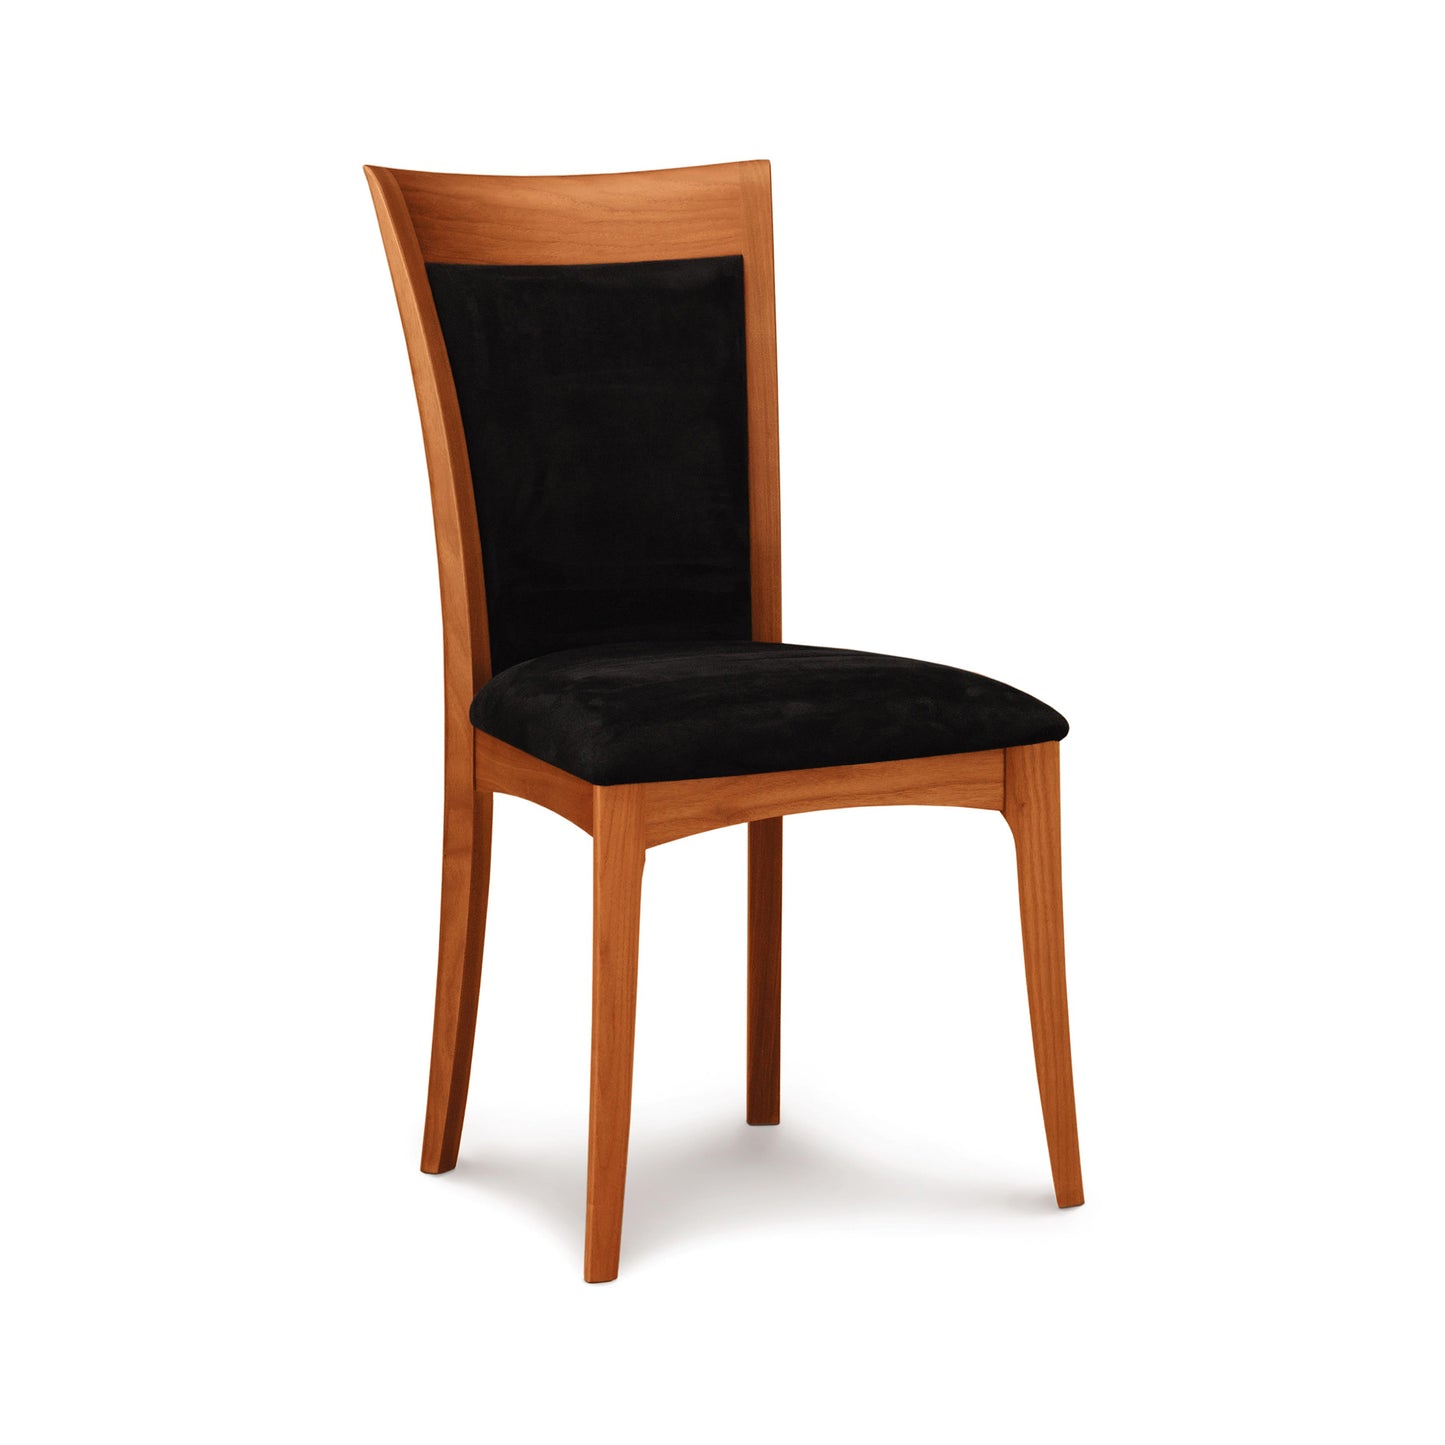 A Morgan Shaker chair from Copeland Furniture with a high, curved backrest and a black upholstered seat, isolated on a white background.